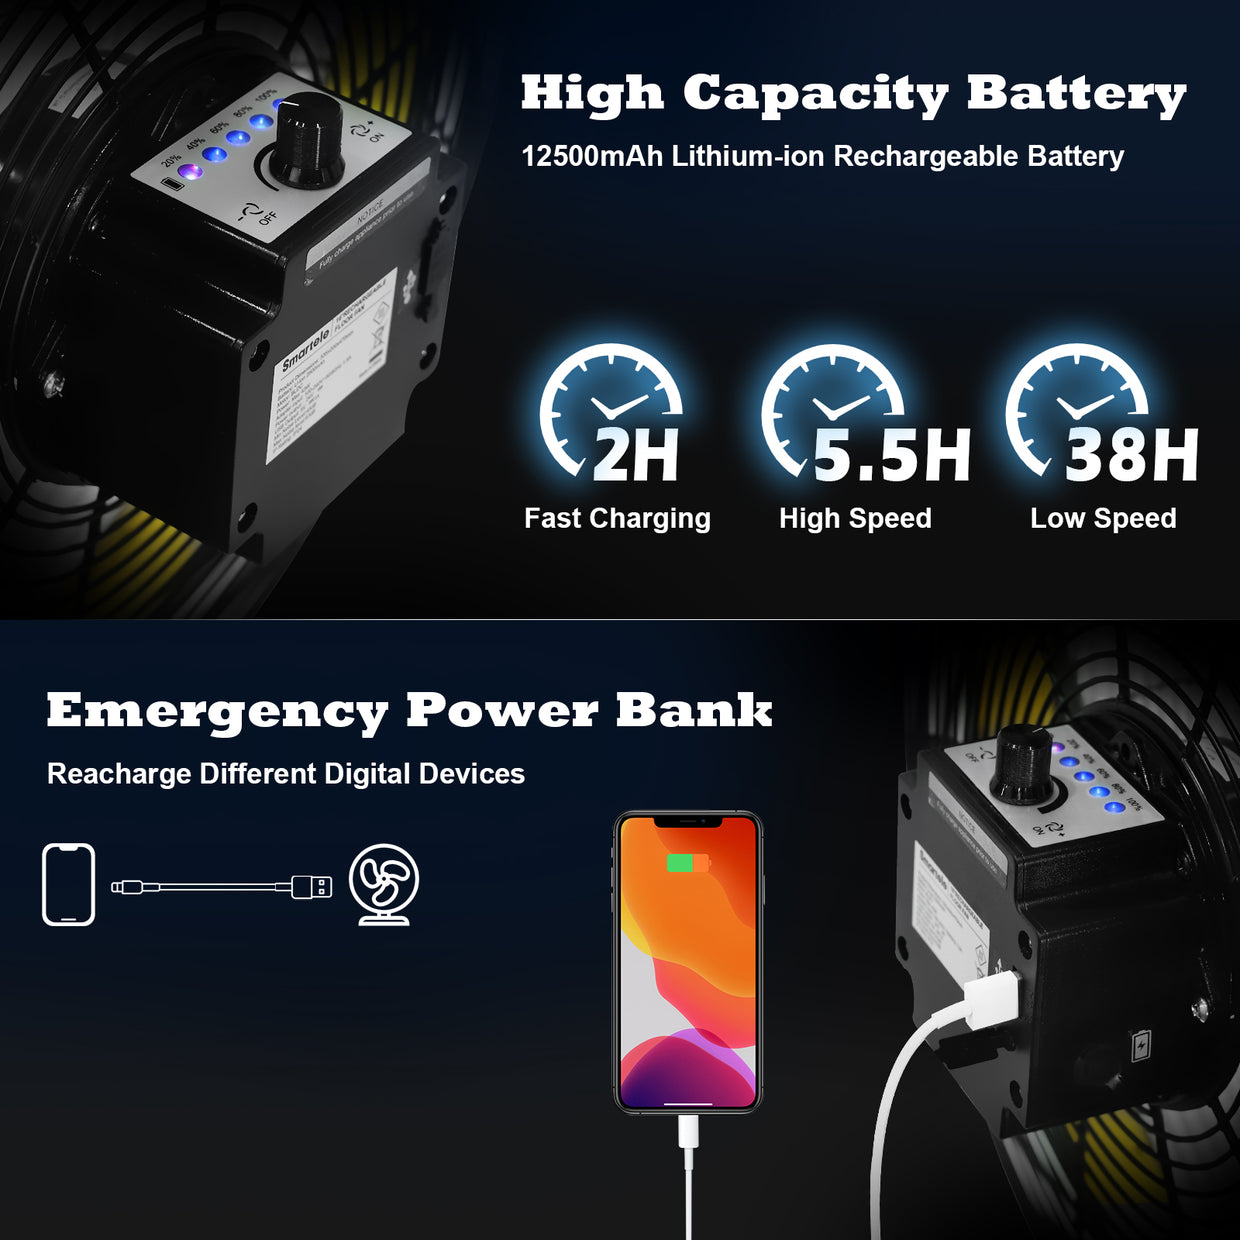 Li - Ion Battery Operated LED Emergency Power Pack 110-240V For LED Lamps